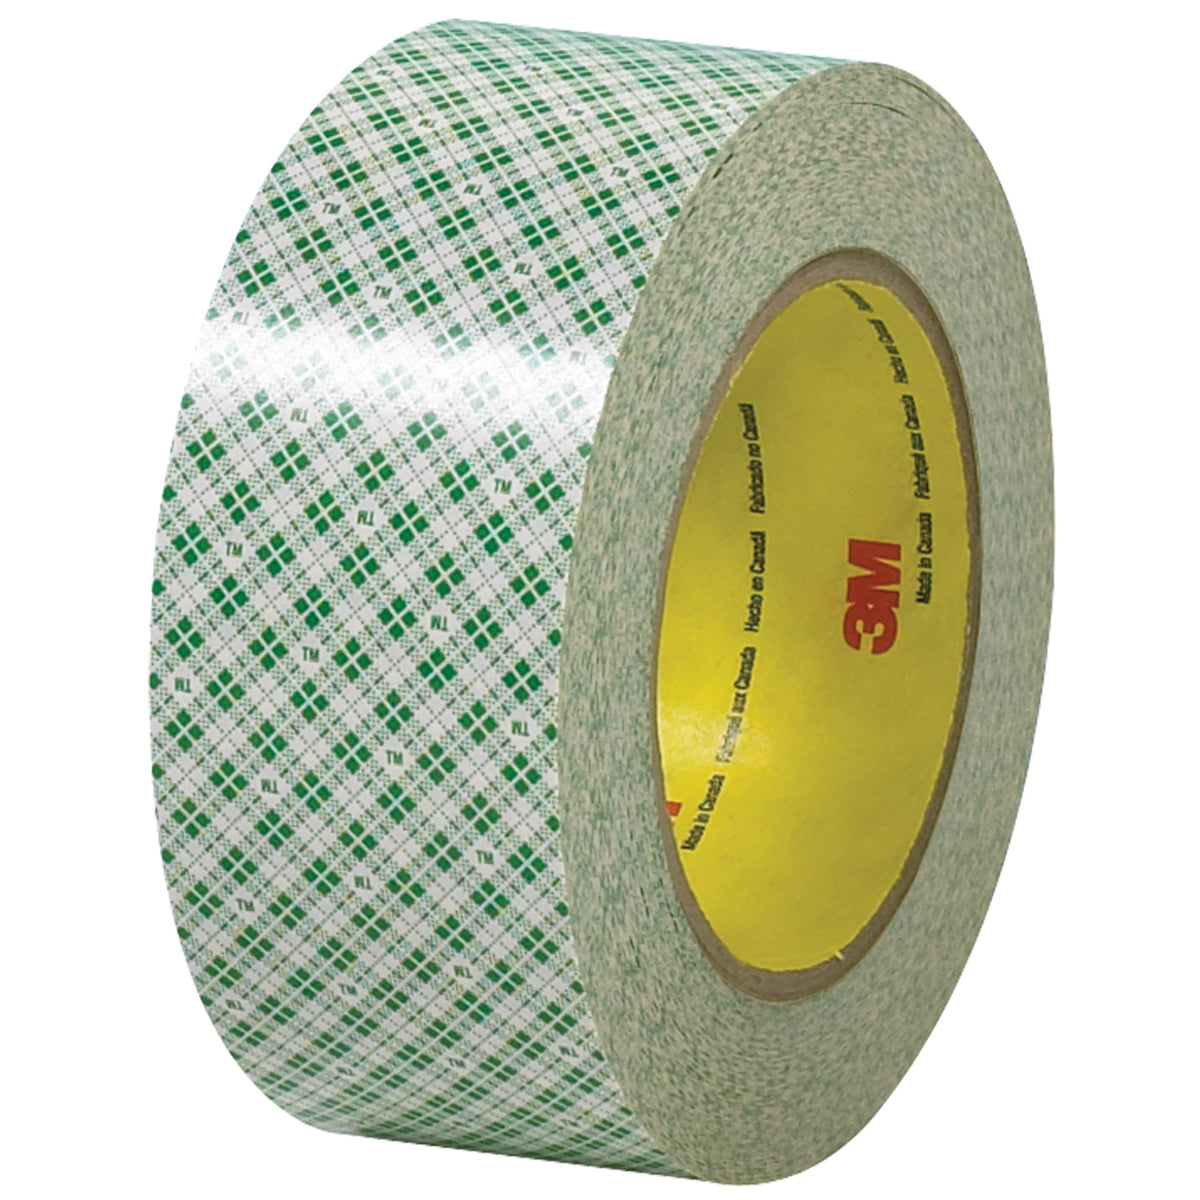 double sided masking tape AND home depot